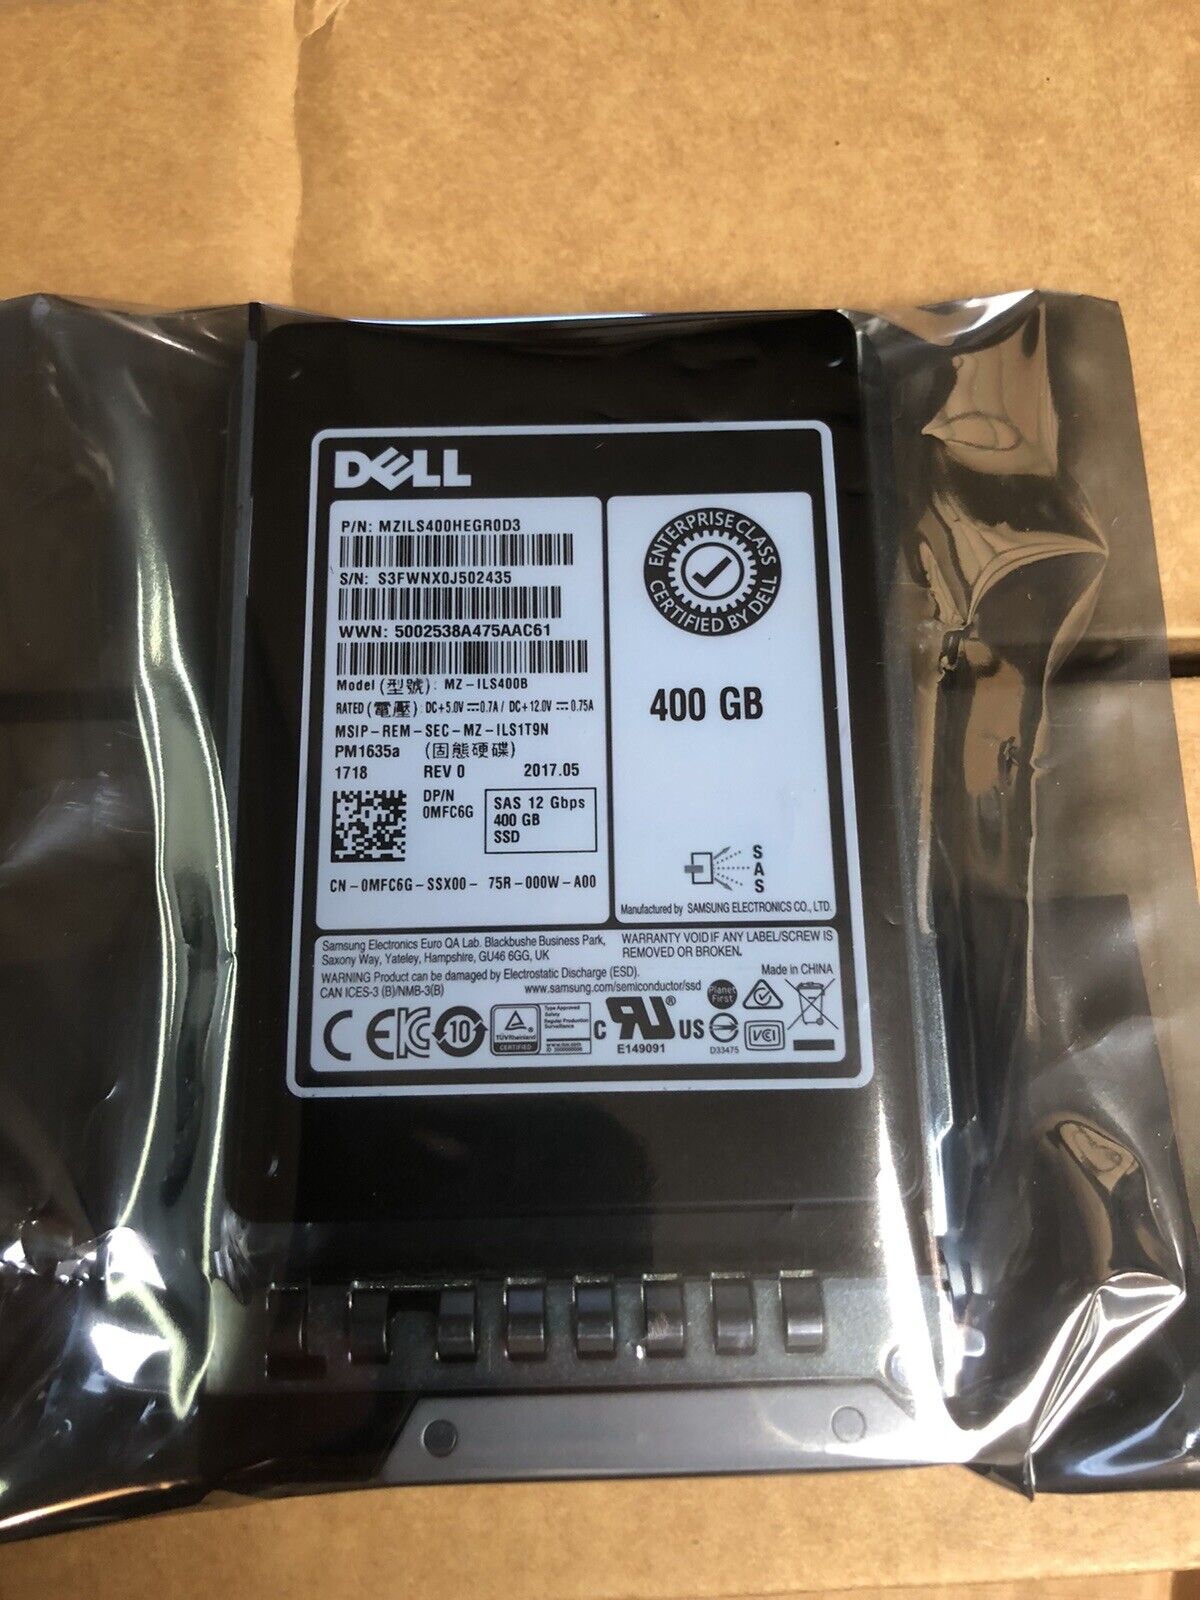 Dell 0MFC6G 400GB SAS 12Gb/s 2.5 SFF Mixed Use TLC SSD Solid State Drive